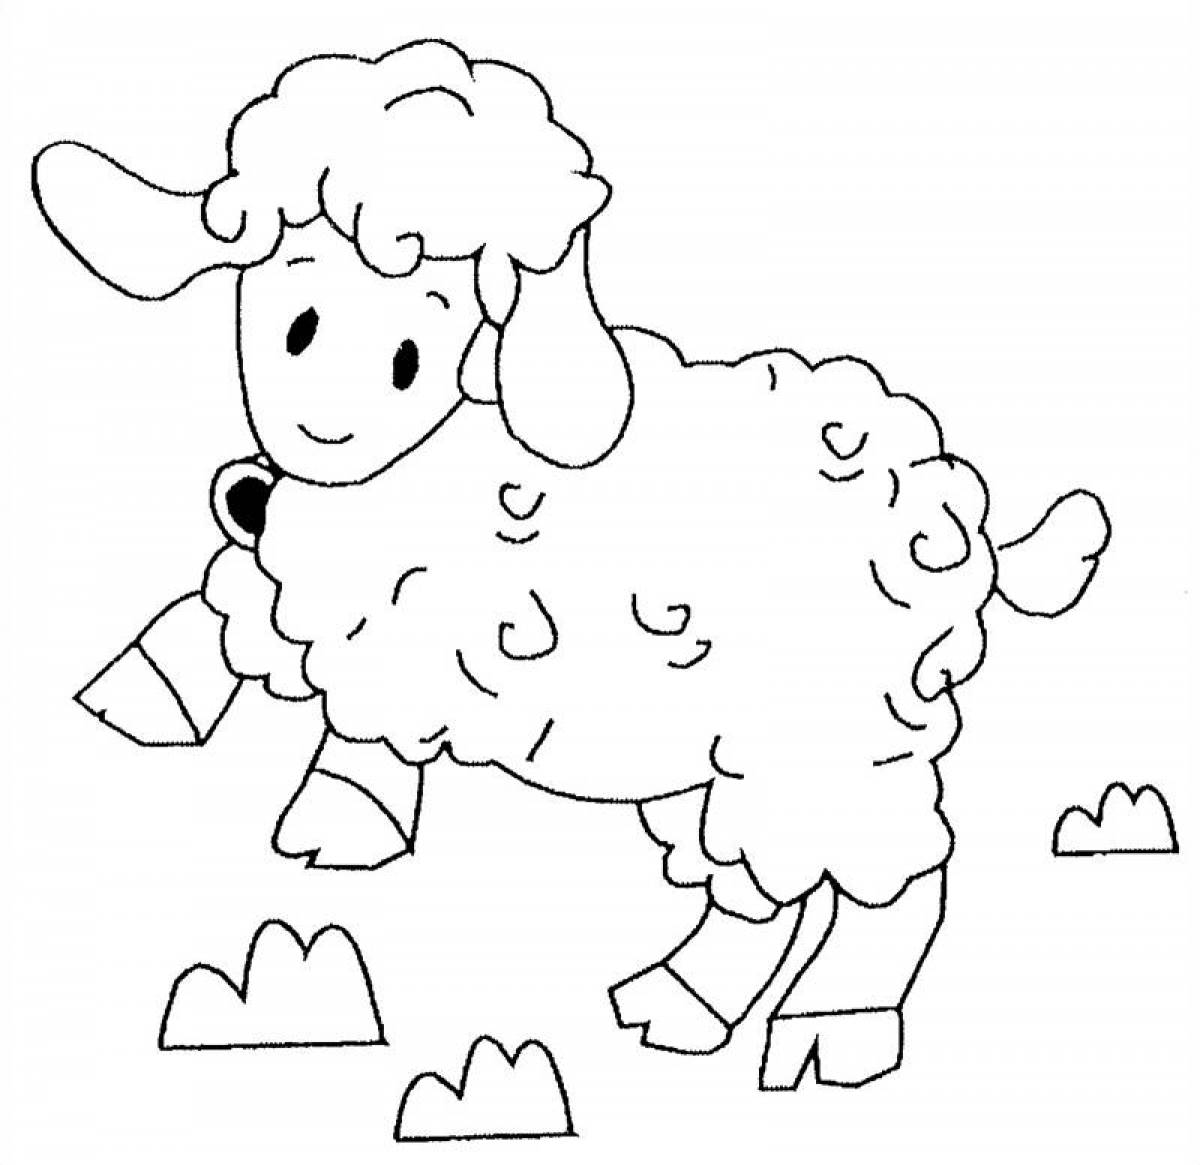 Live coloring of sheep for children